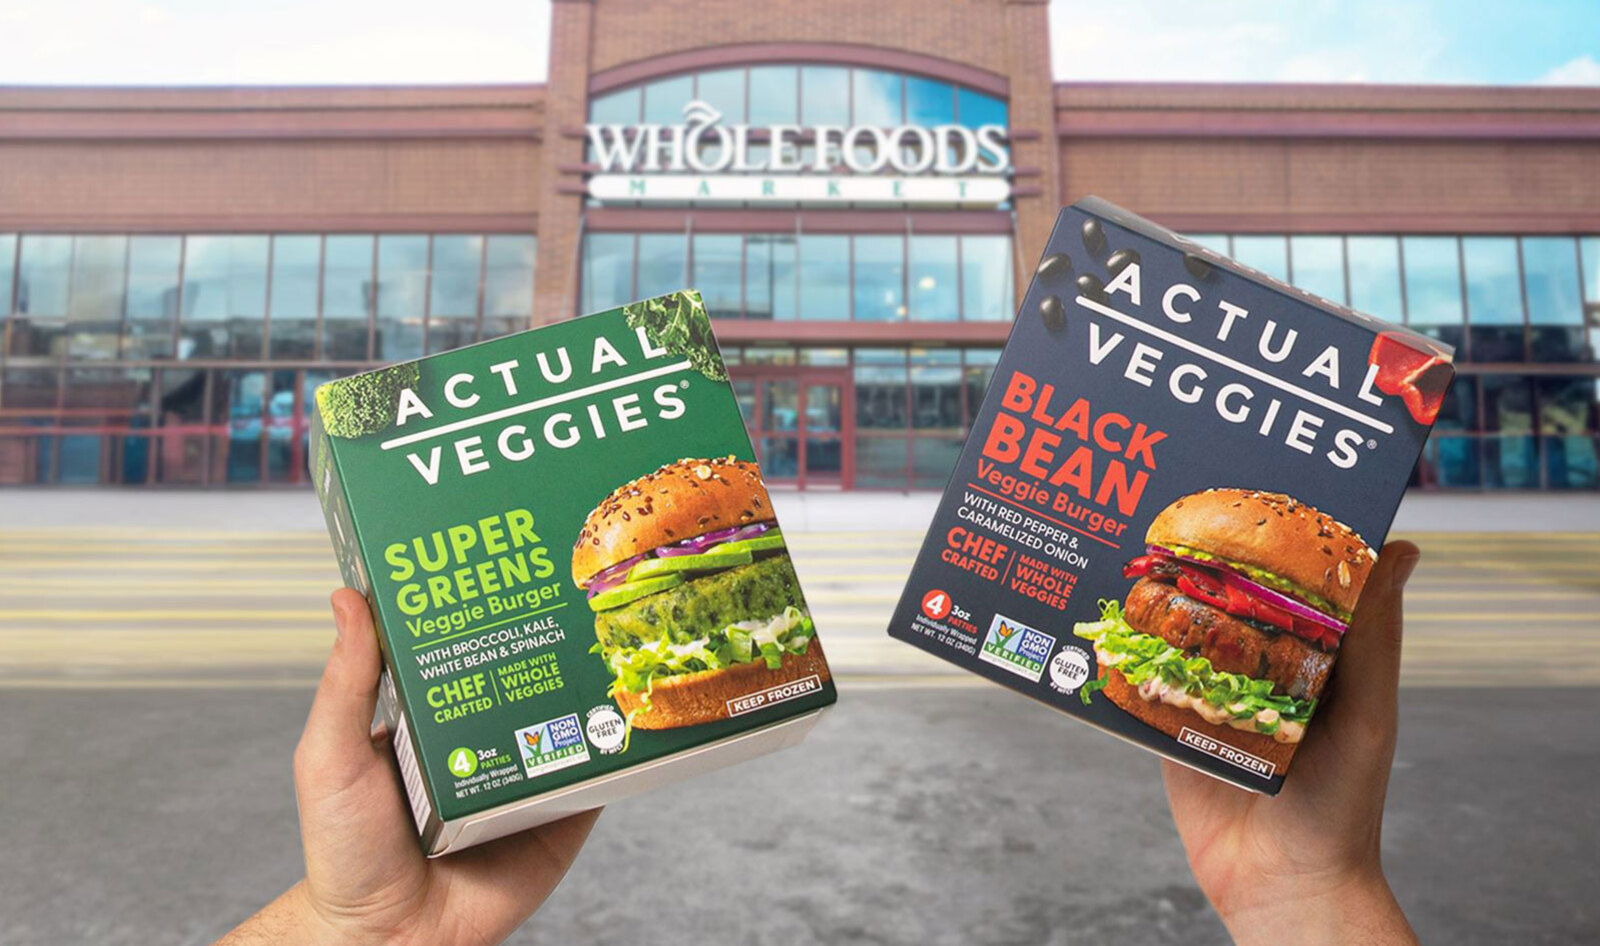 These Veggie Burgers Sold Out on QVC In 8 Minutes. Now They're at Whole Foods.